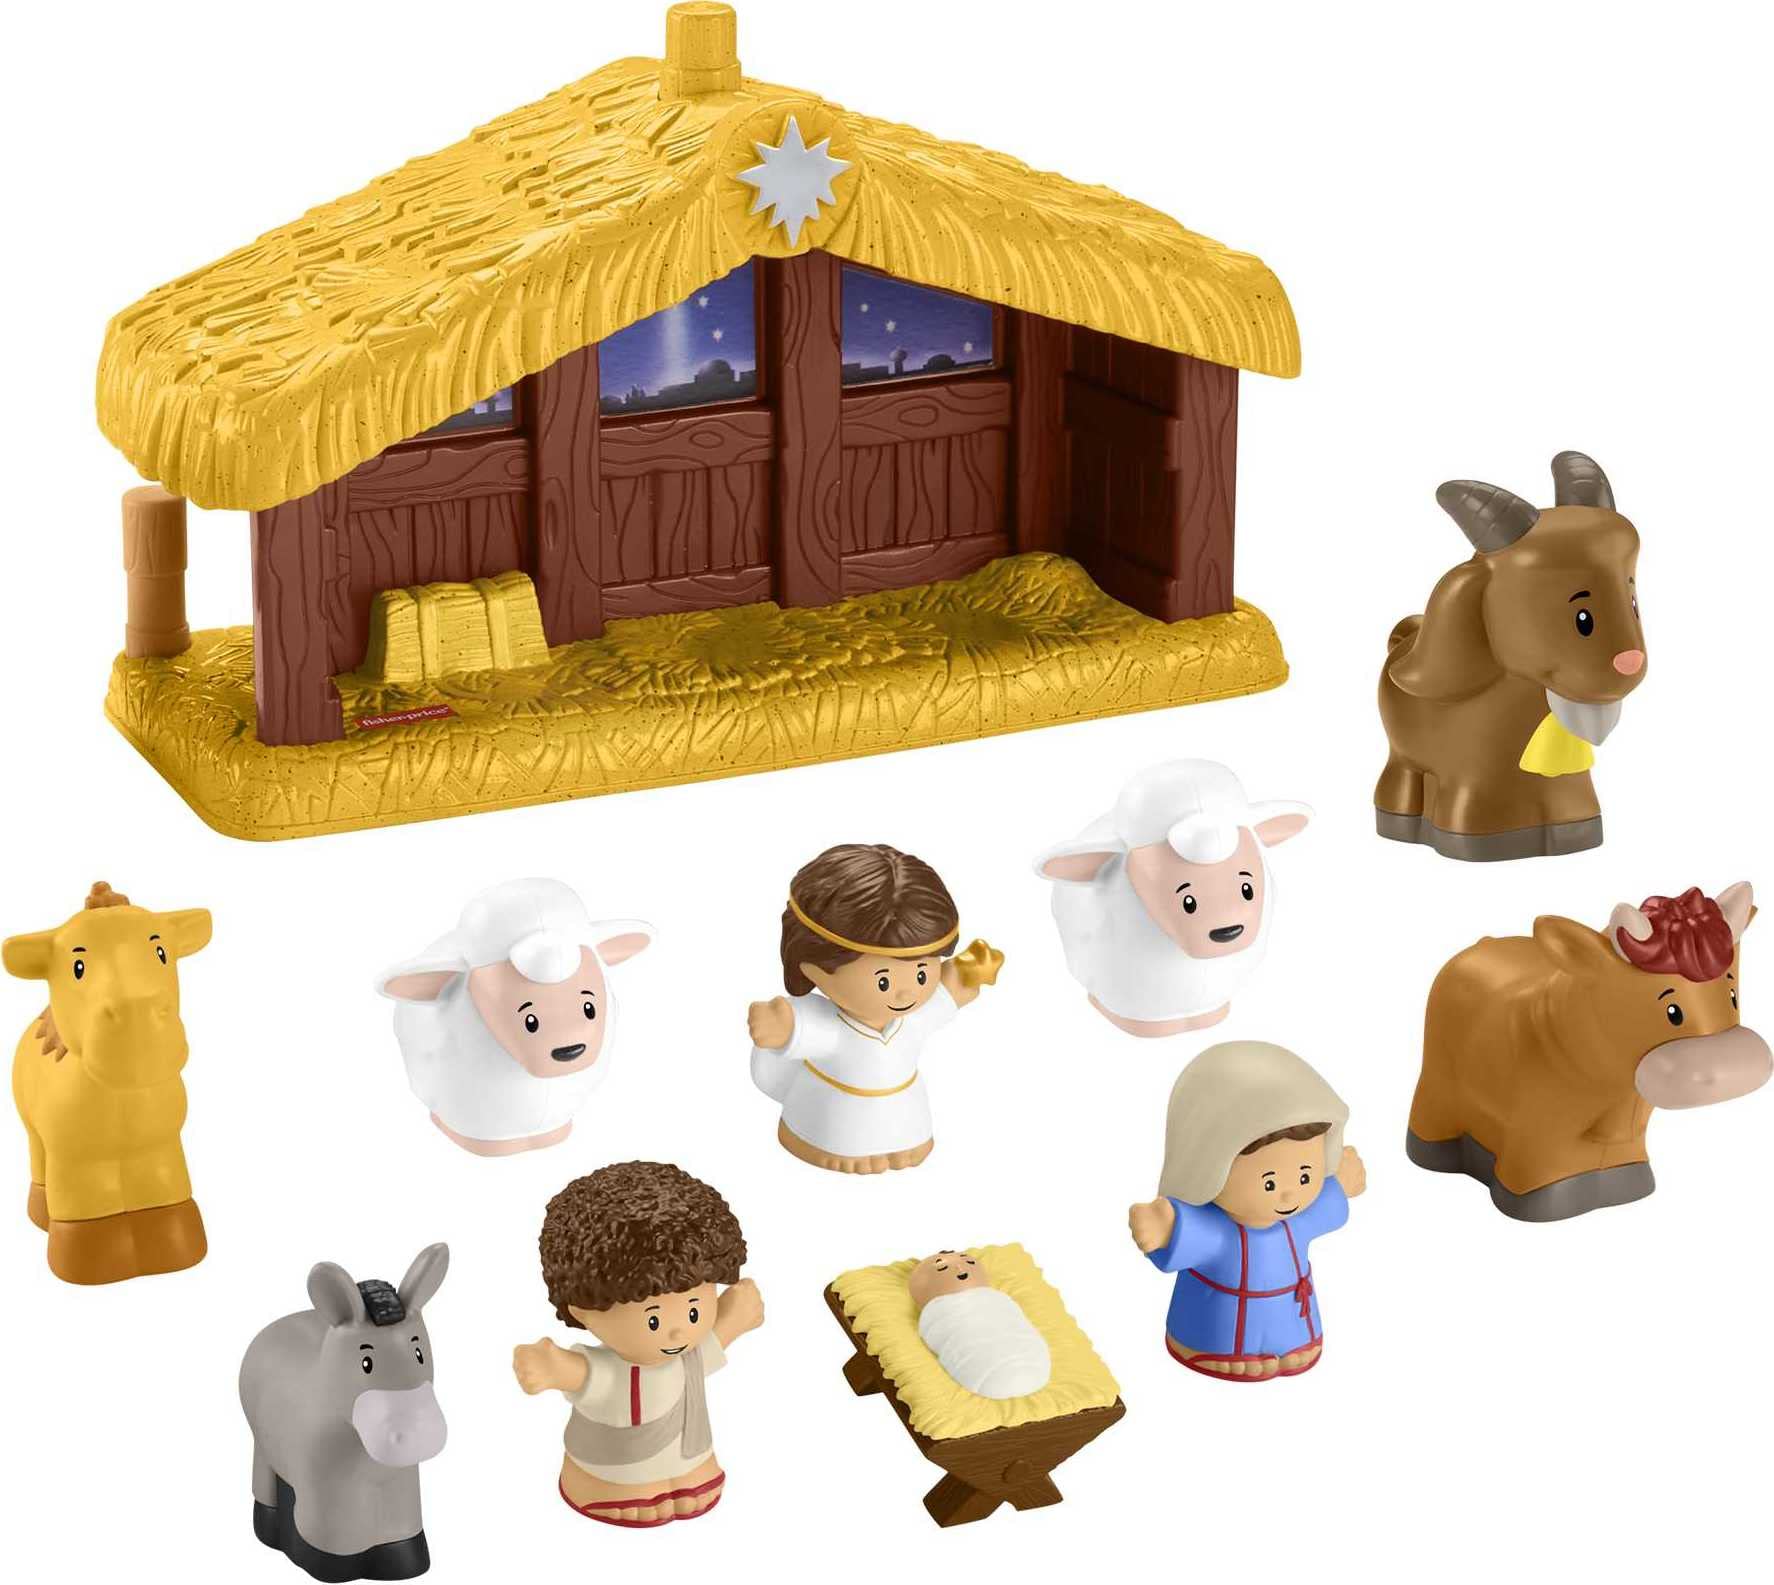 Fisher-Price Little People Toddler Playset Nativity Scene with Baby Jesus Mary & Joseph Figures for Christmas Play Ages 1+ Years